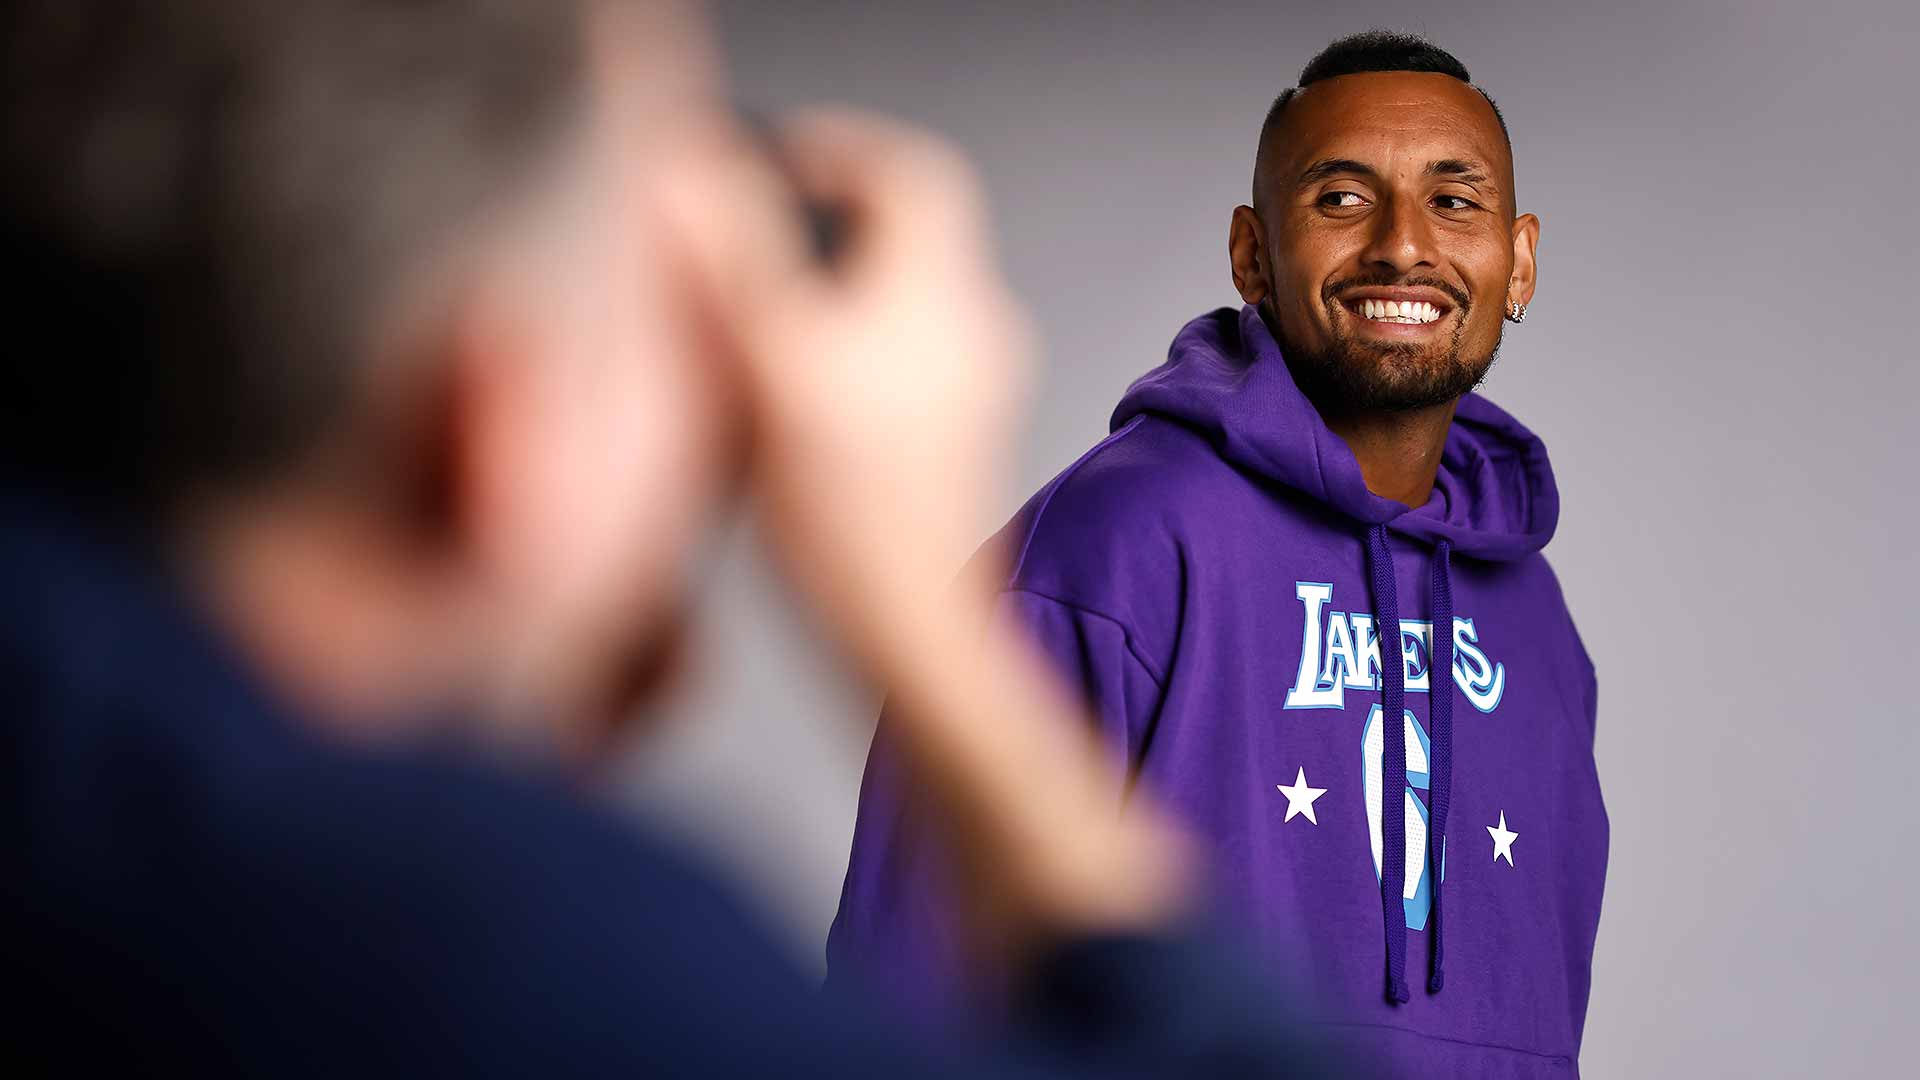 <a href='https://www.atptour.com/en/players/nick-kyrgios/ke17/overview'>Nick Kyrgios</a> at the 2022 ATP/WTA Super Shoot in Indian Wells.